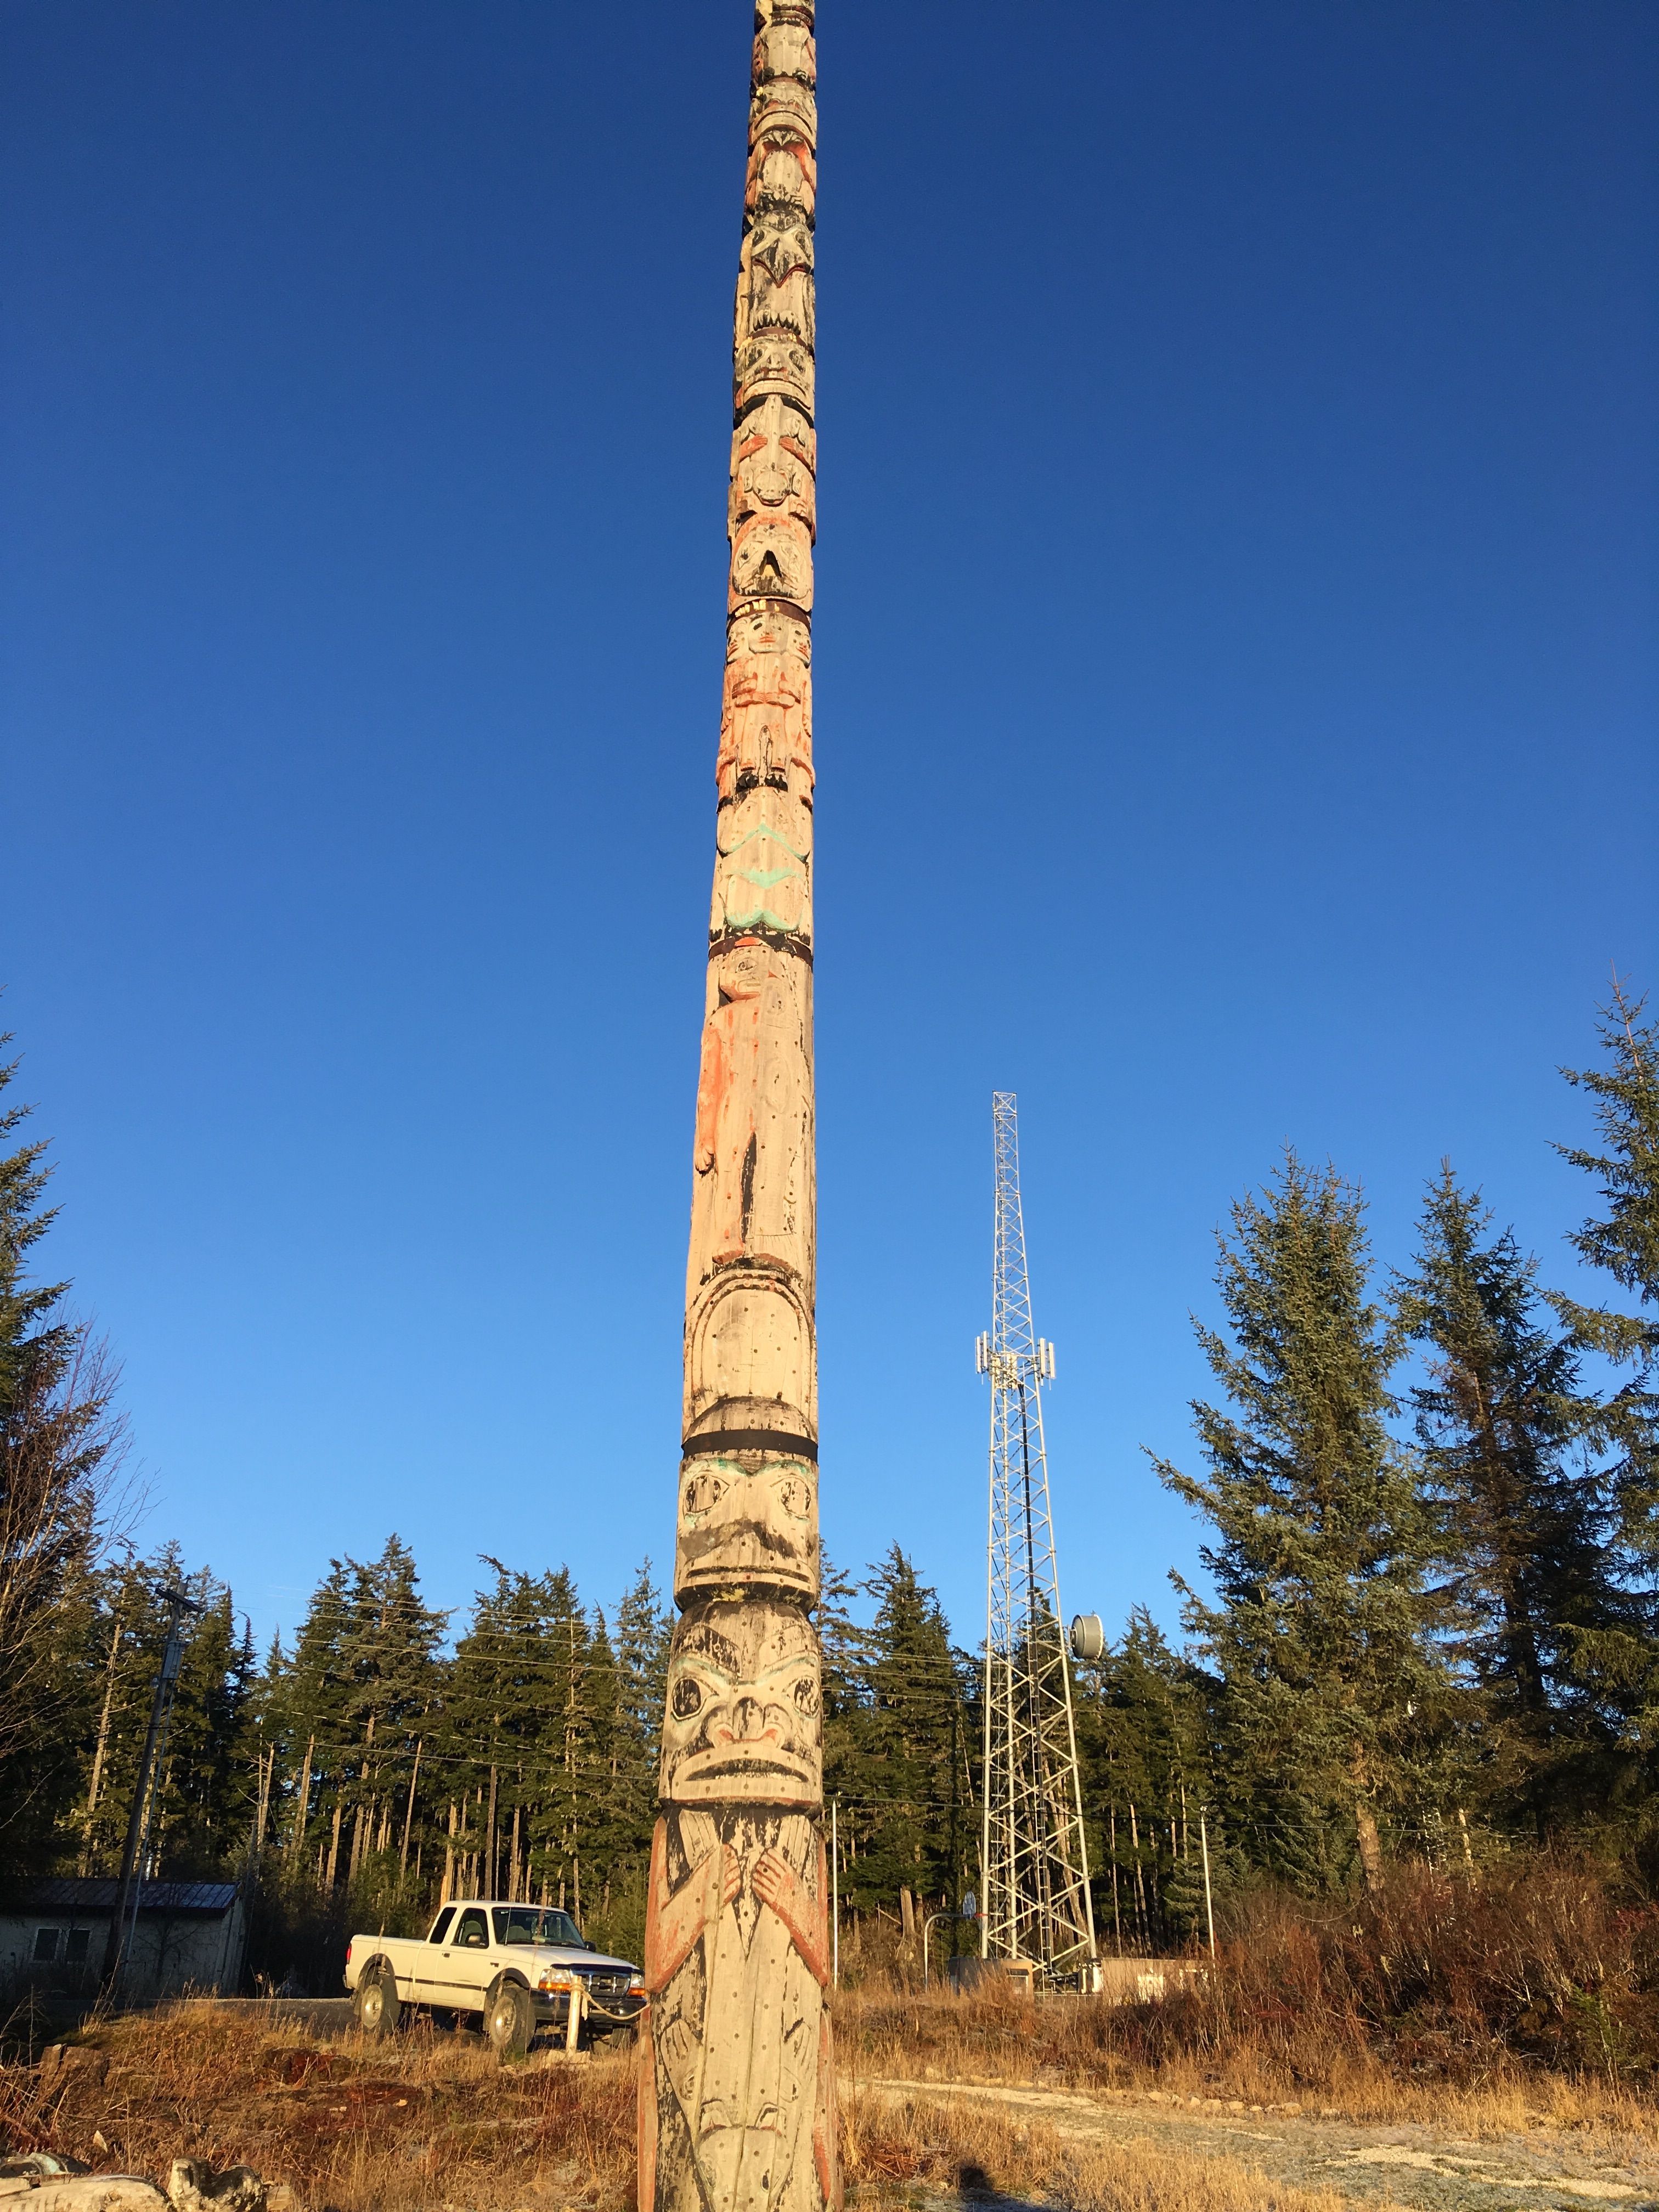 Kake has the tallest totem pole in the world. Image by Brooke Stephenson. United States, 2019.